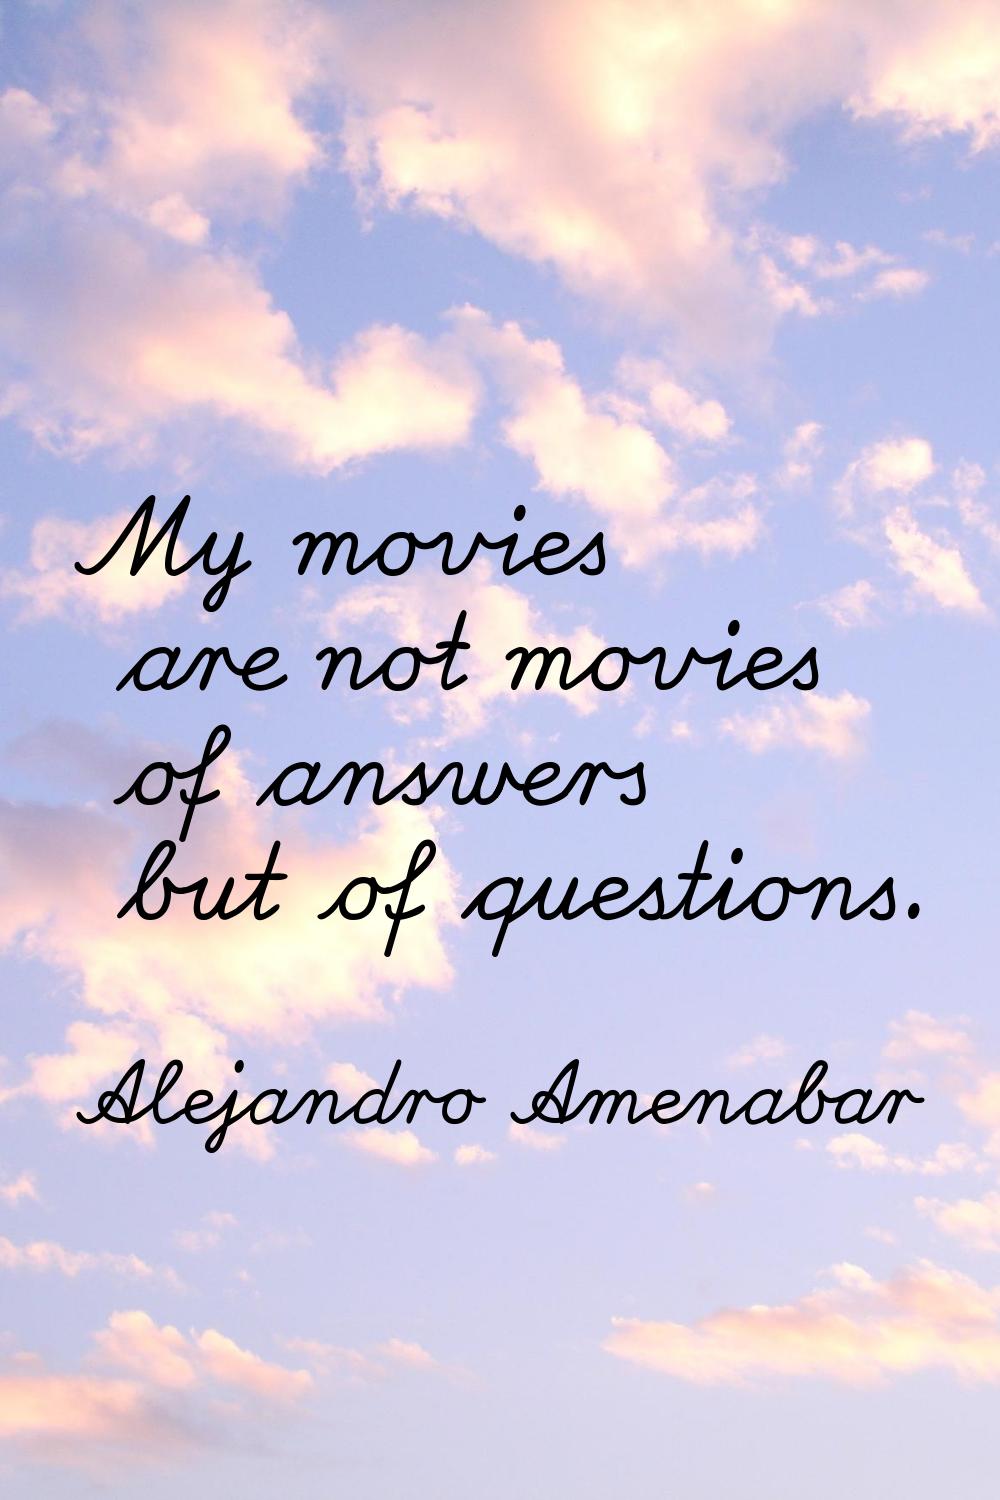 My movies are not movies of answers but of questions.